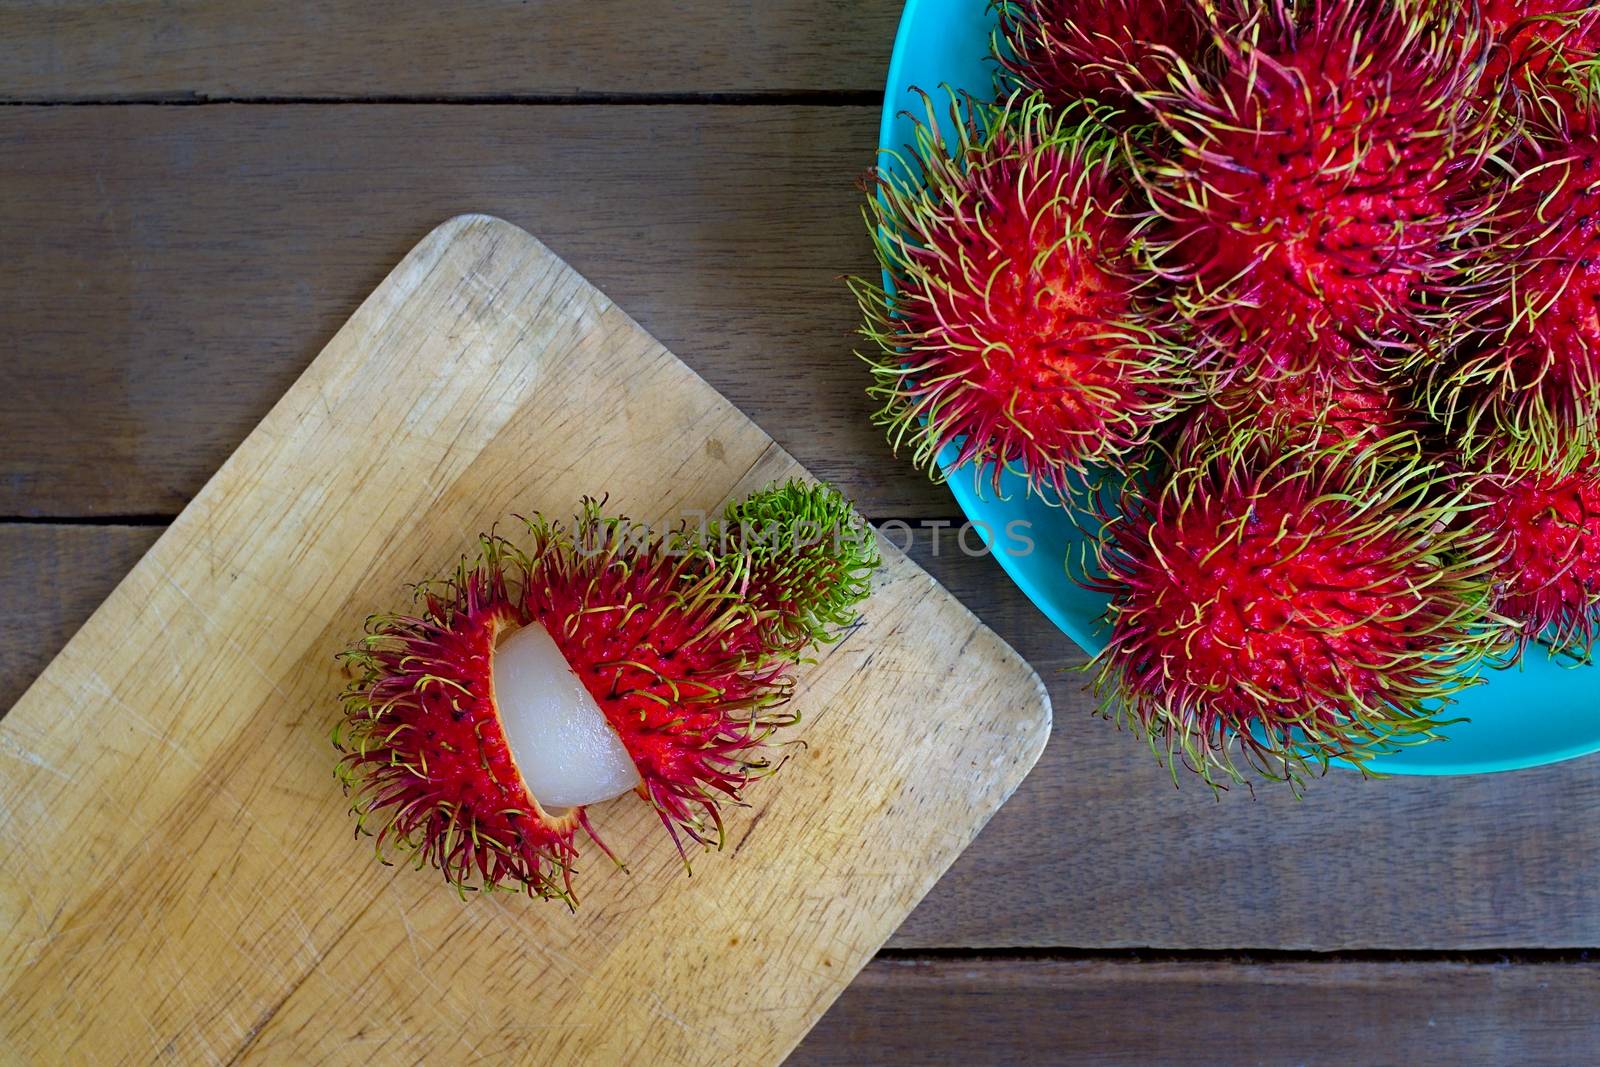 Exotic ripe rambutan fruits from Southeast Asia. Typically found in Indonesia, Malaysia, Thailand and the Philippines.